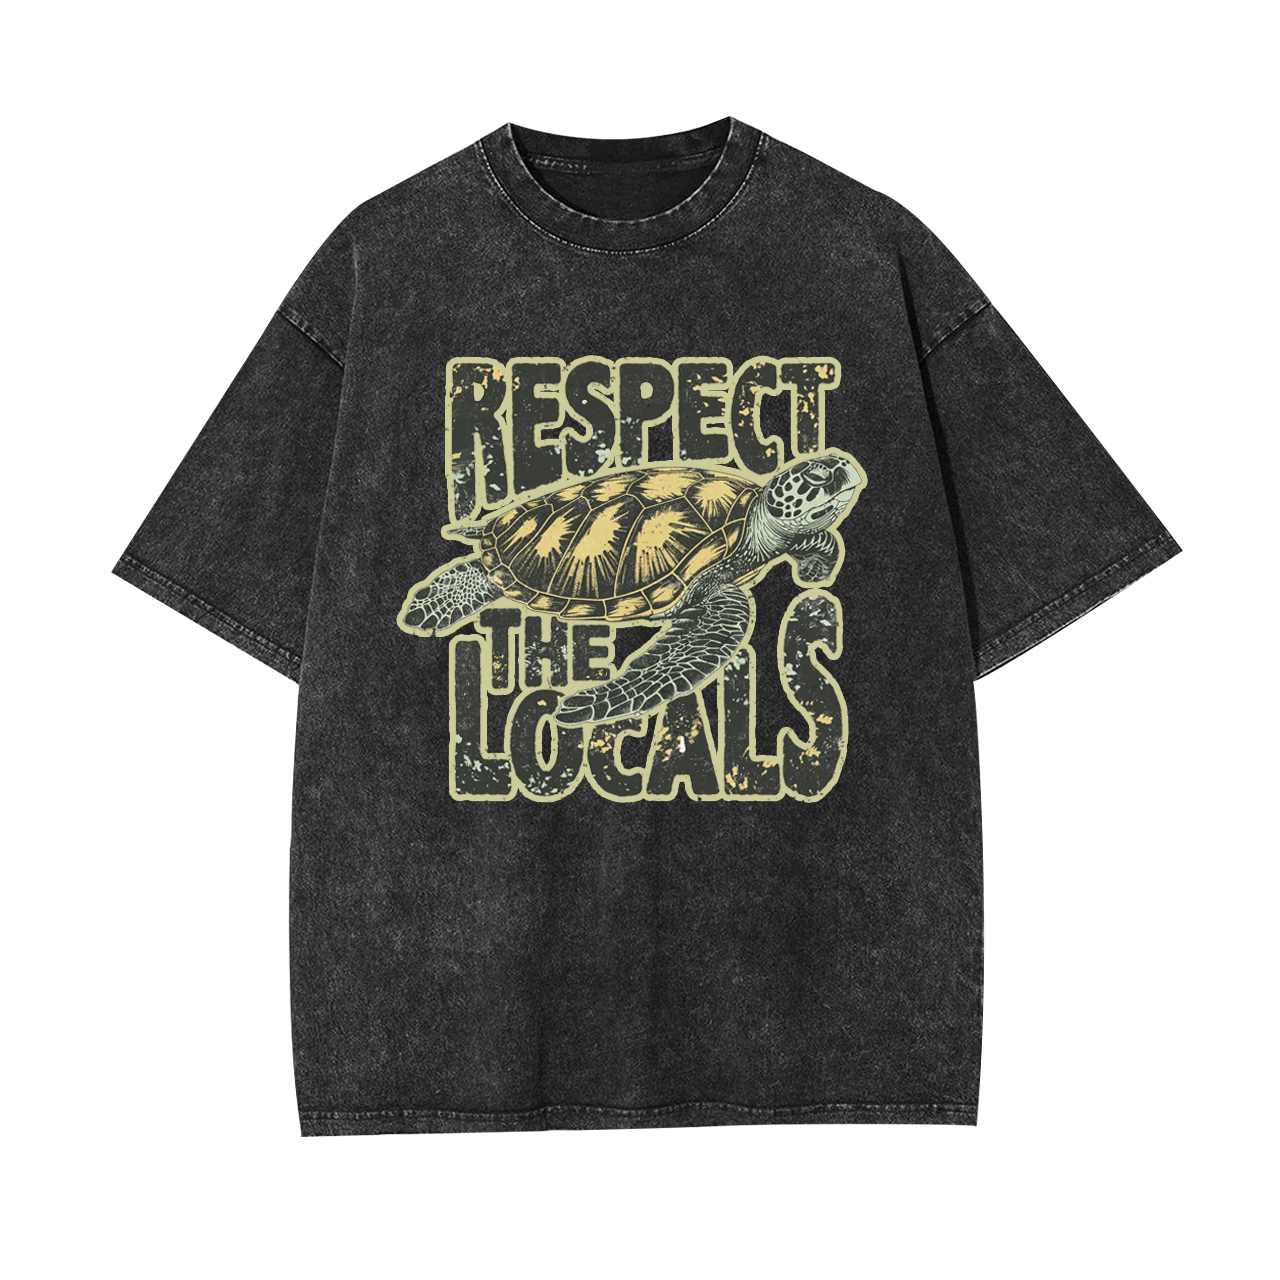 Respect The Locals Garment-dye Tees